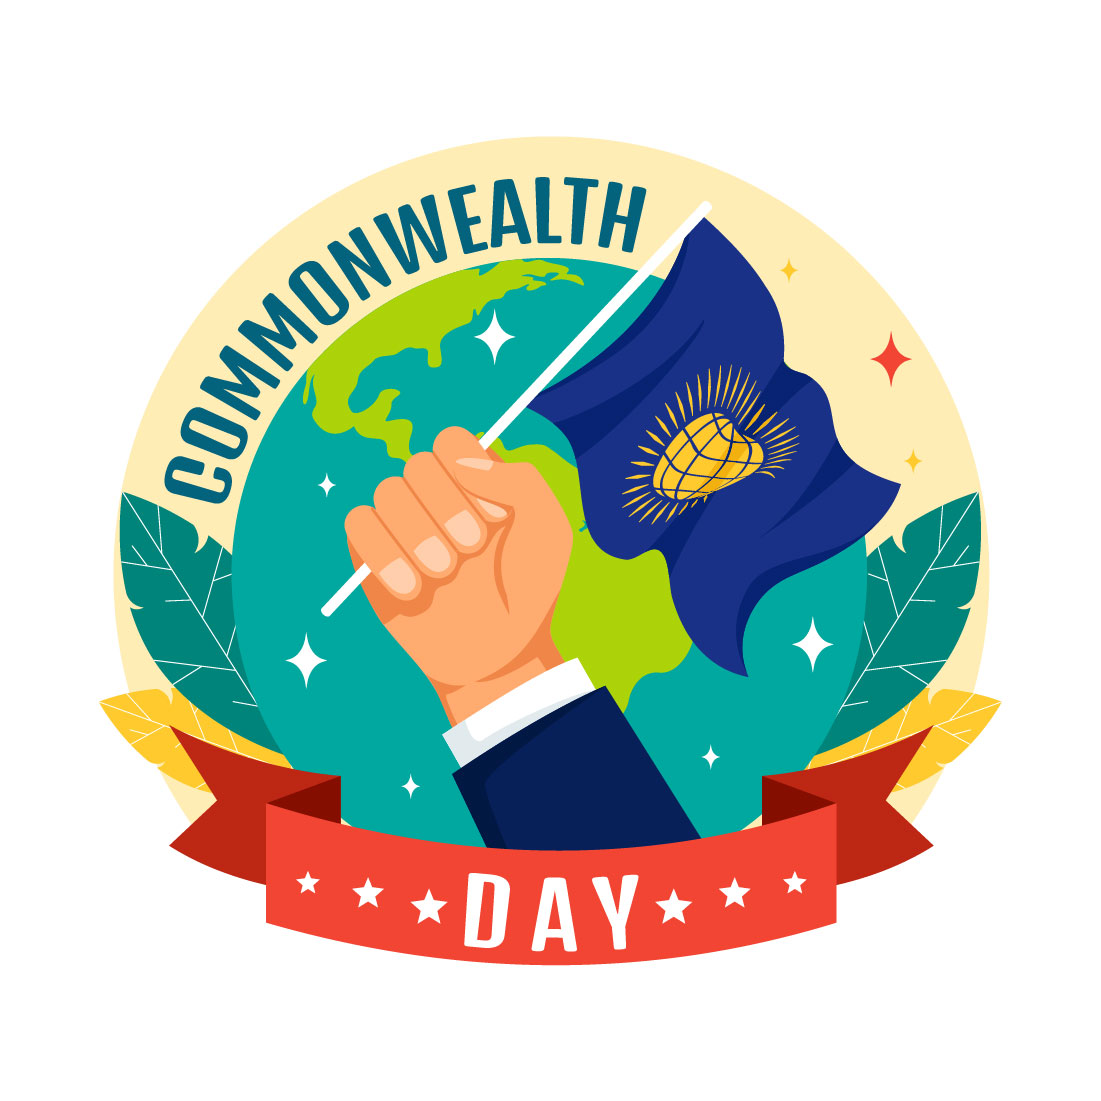 12 Commonwealth Day Illustration cover image.